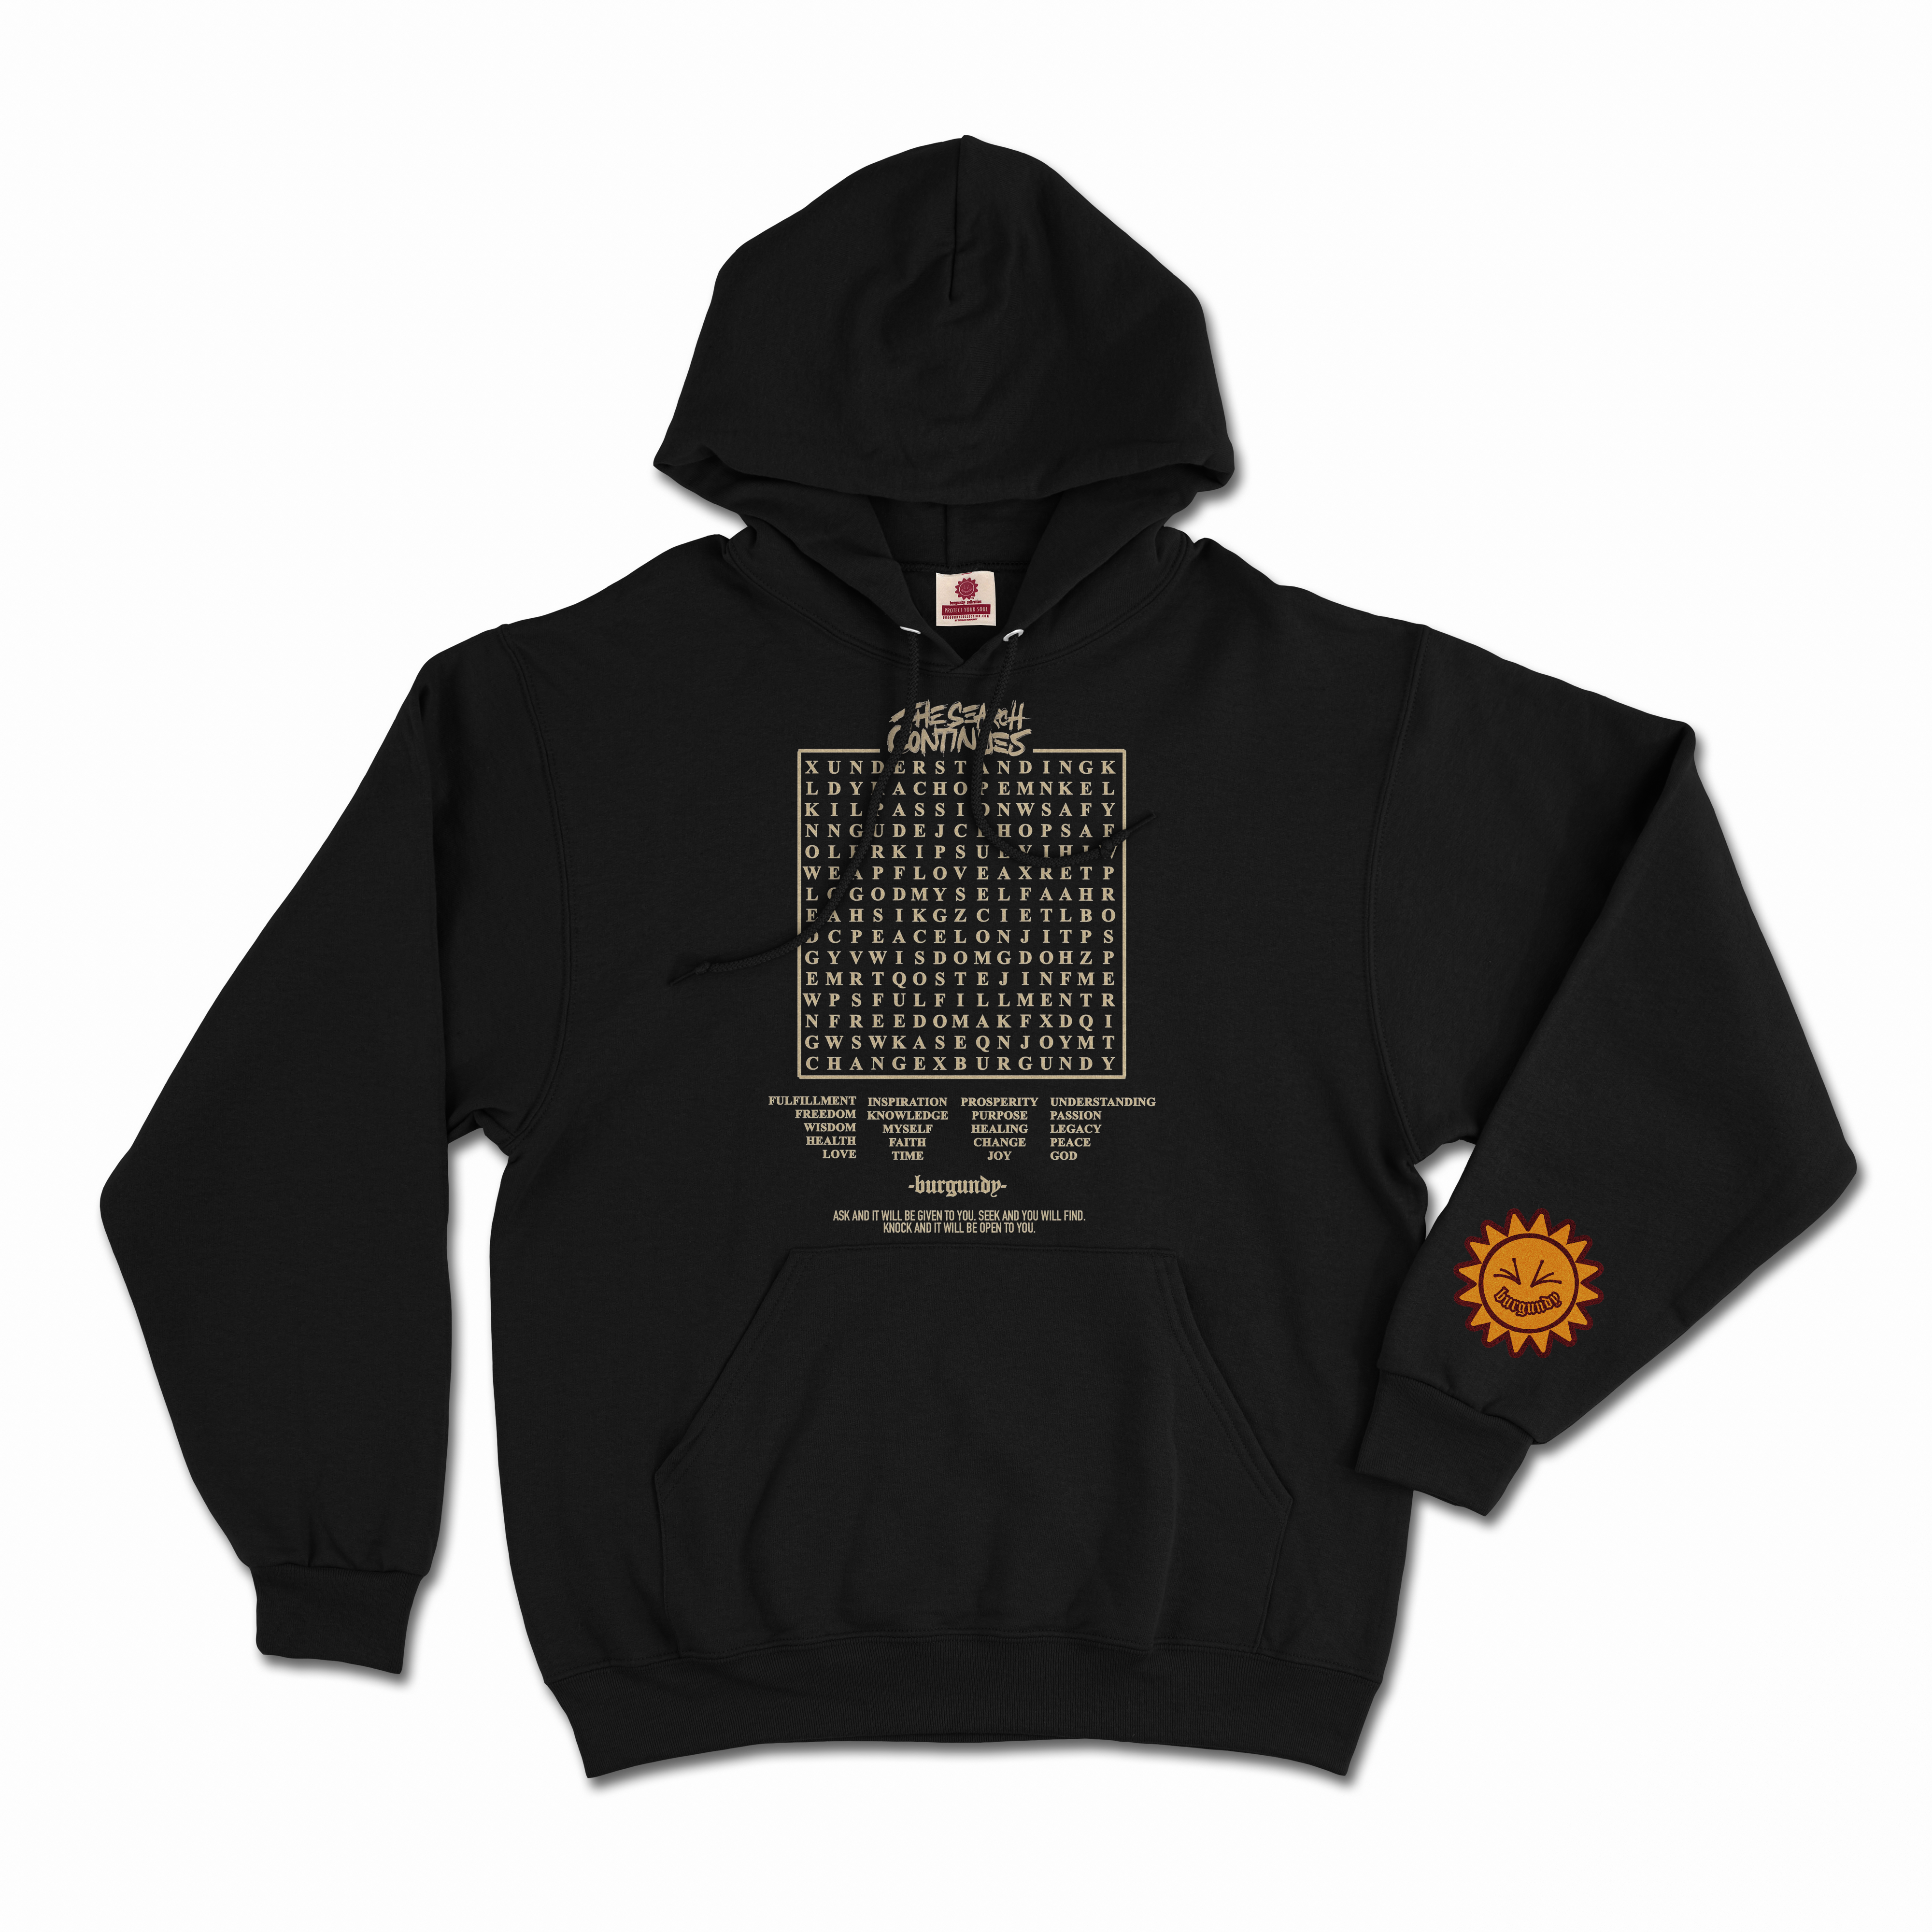 THE SEARCH CONTINUES (HOODIE)